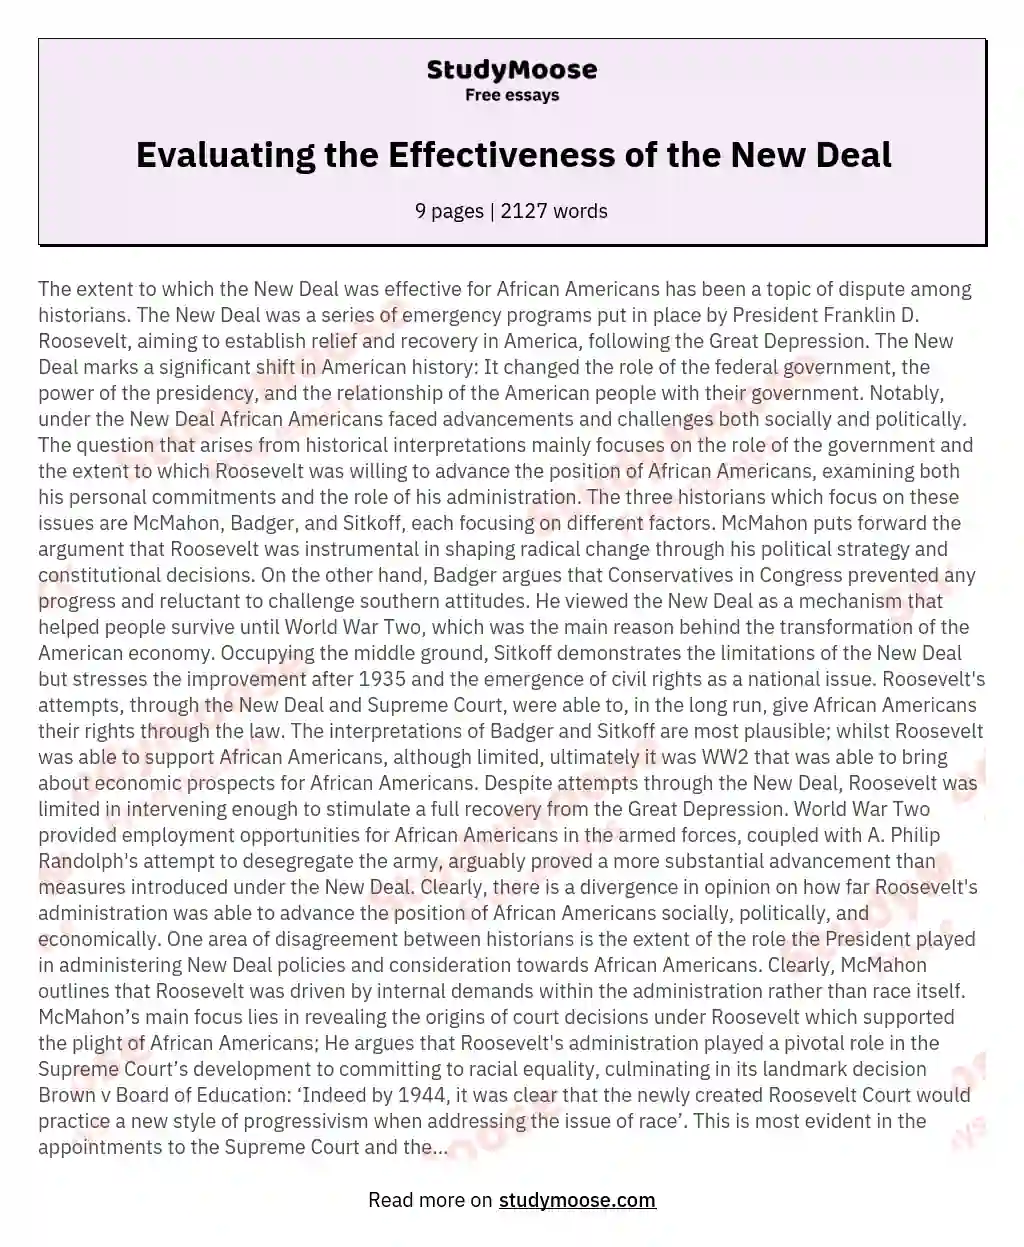 Evaluating the Effectiveness of the New Deal essay